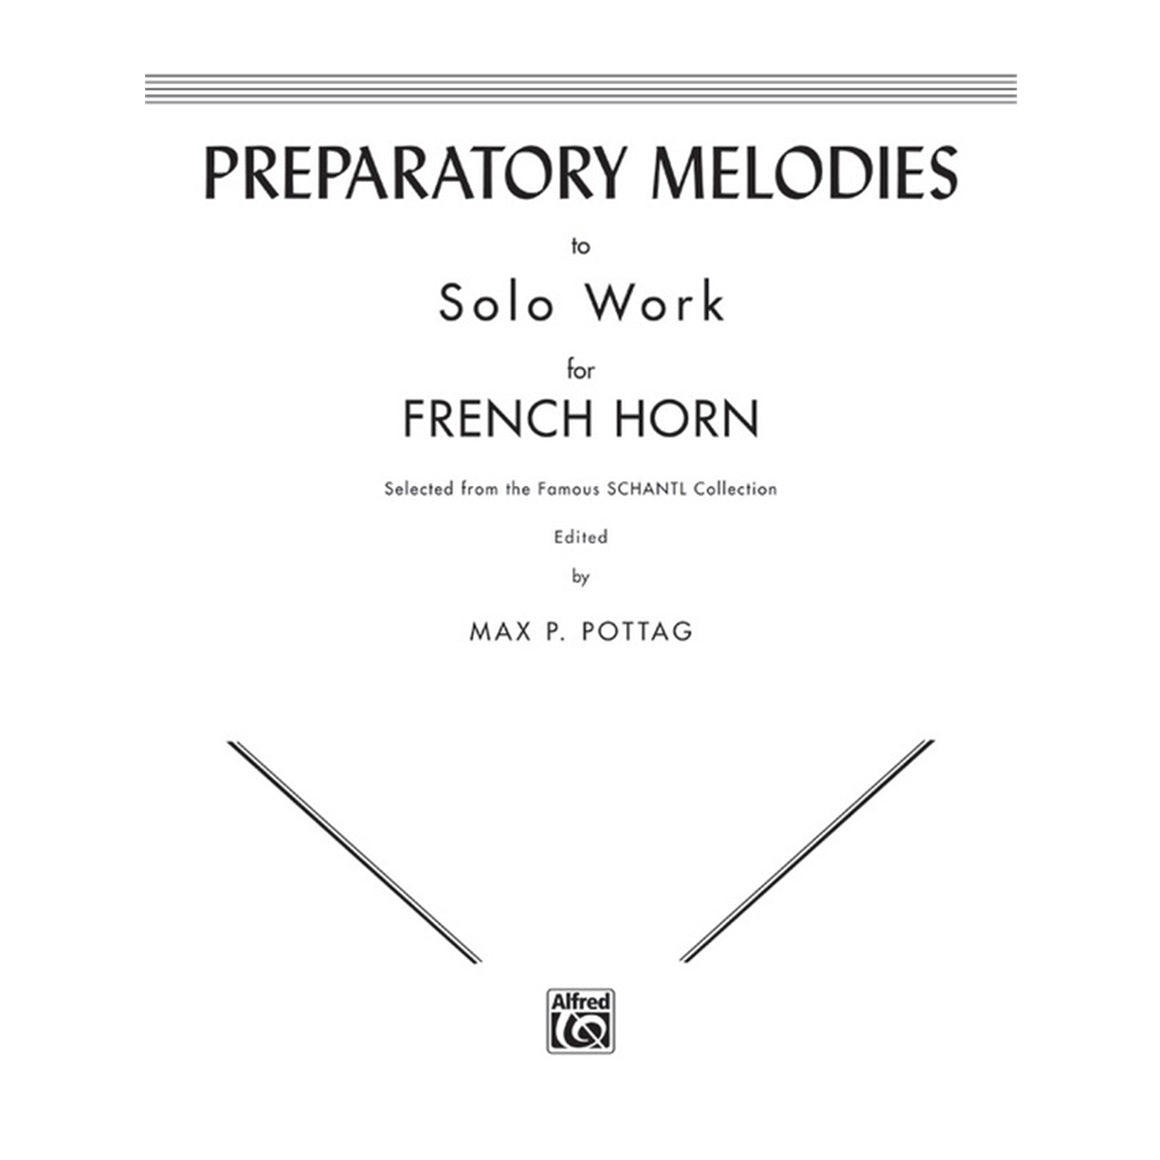 ALFRED 00EL00082 Preparatory Melodies to Solo Work for French Horn (from Schantl) [French Horn]